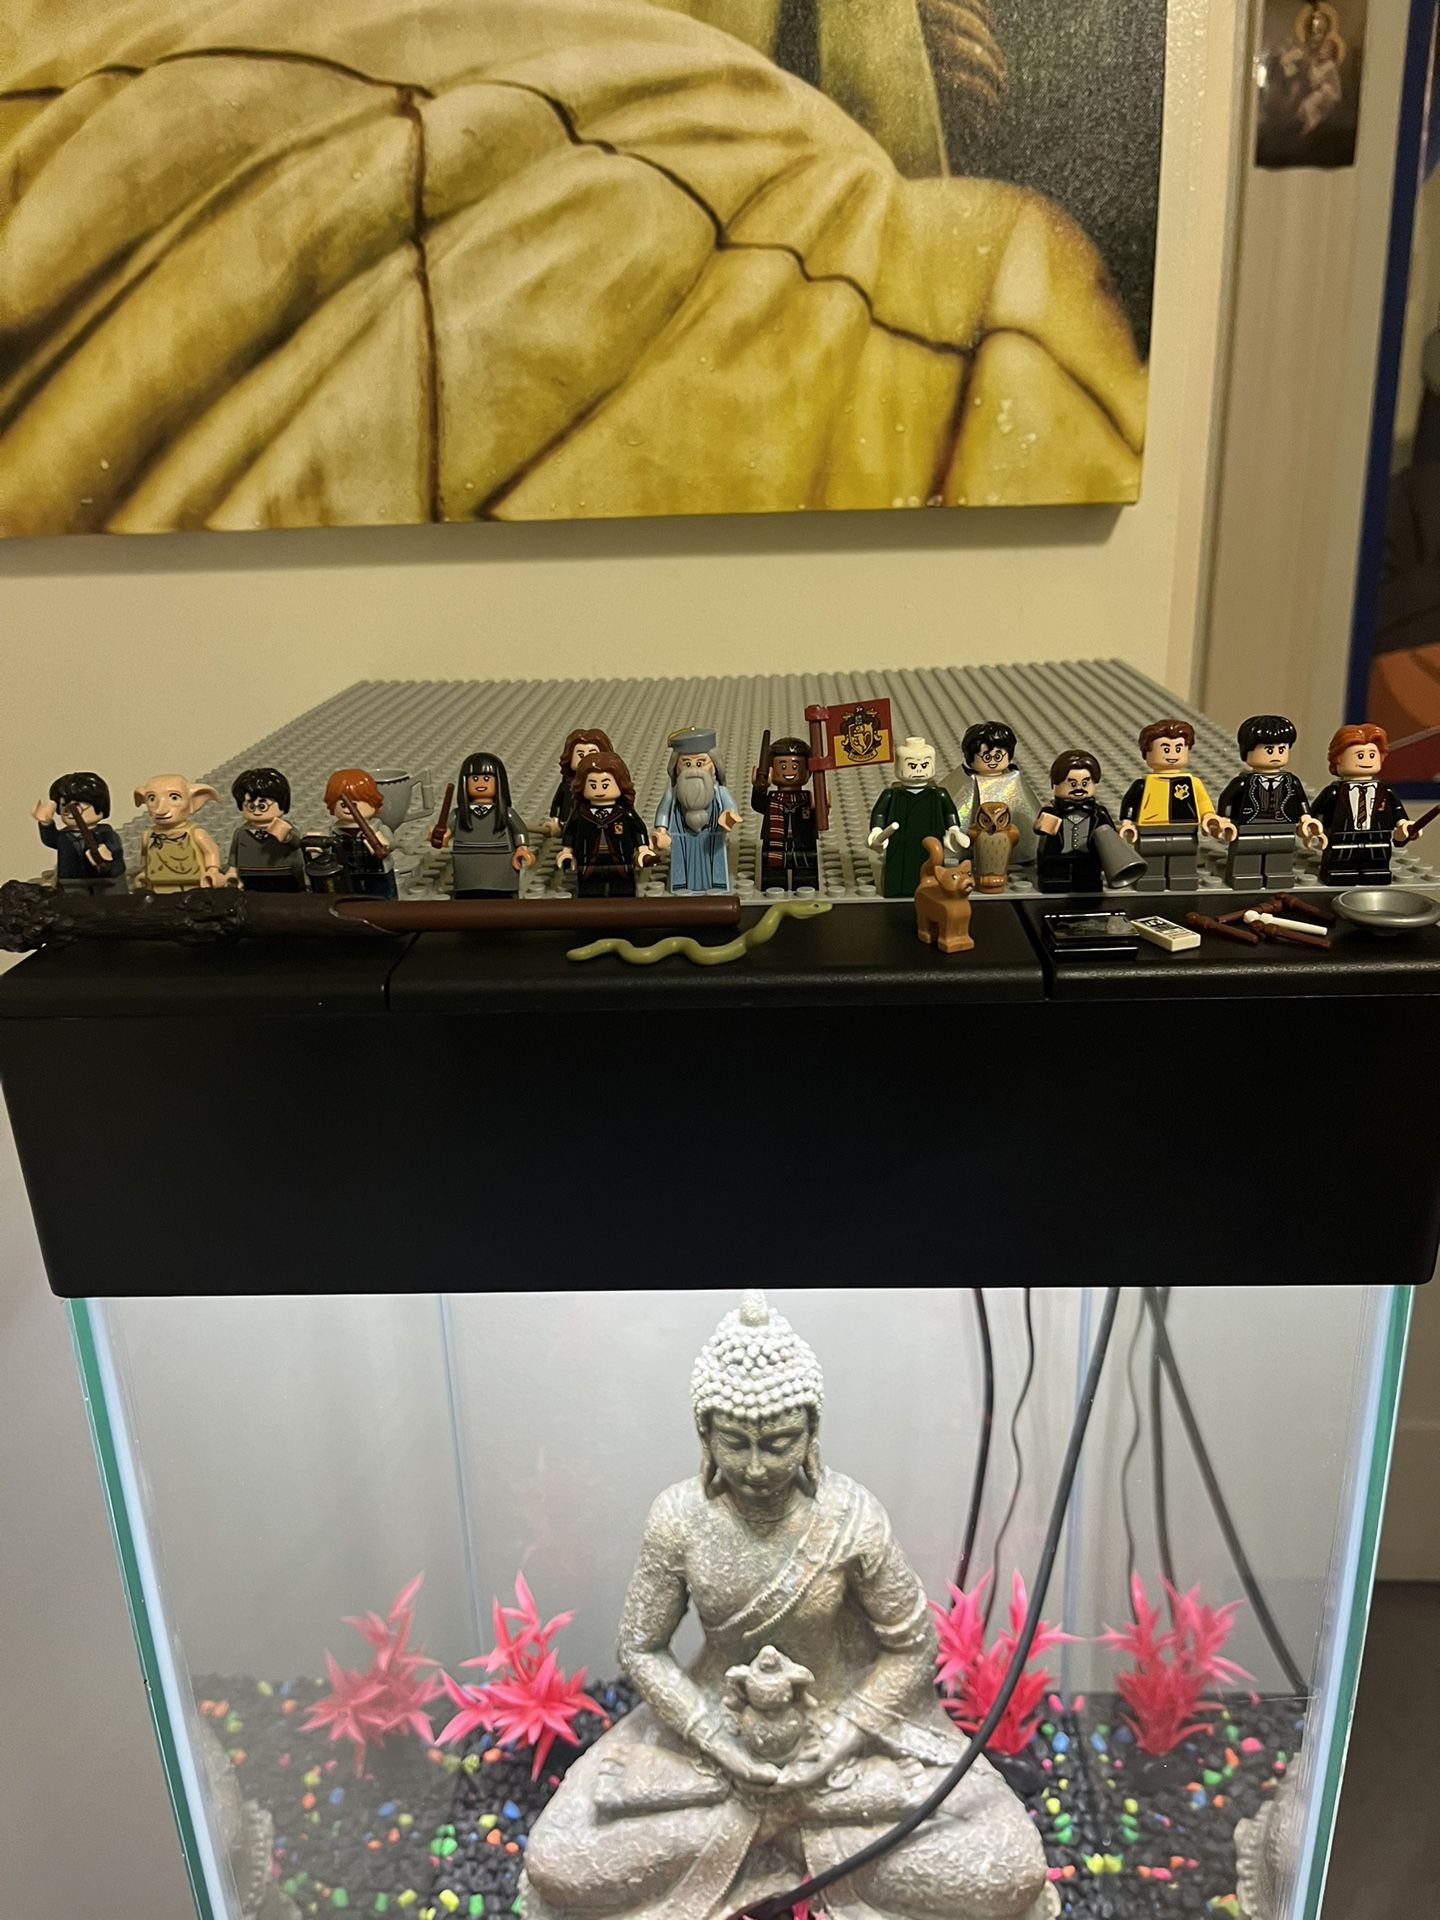 Lego Harry Potter Minifigures & Harry Potter - Wand Pen and Bookmark 